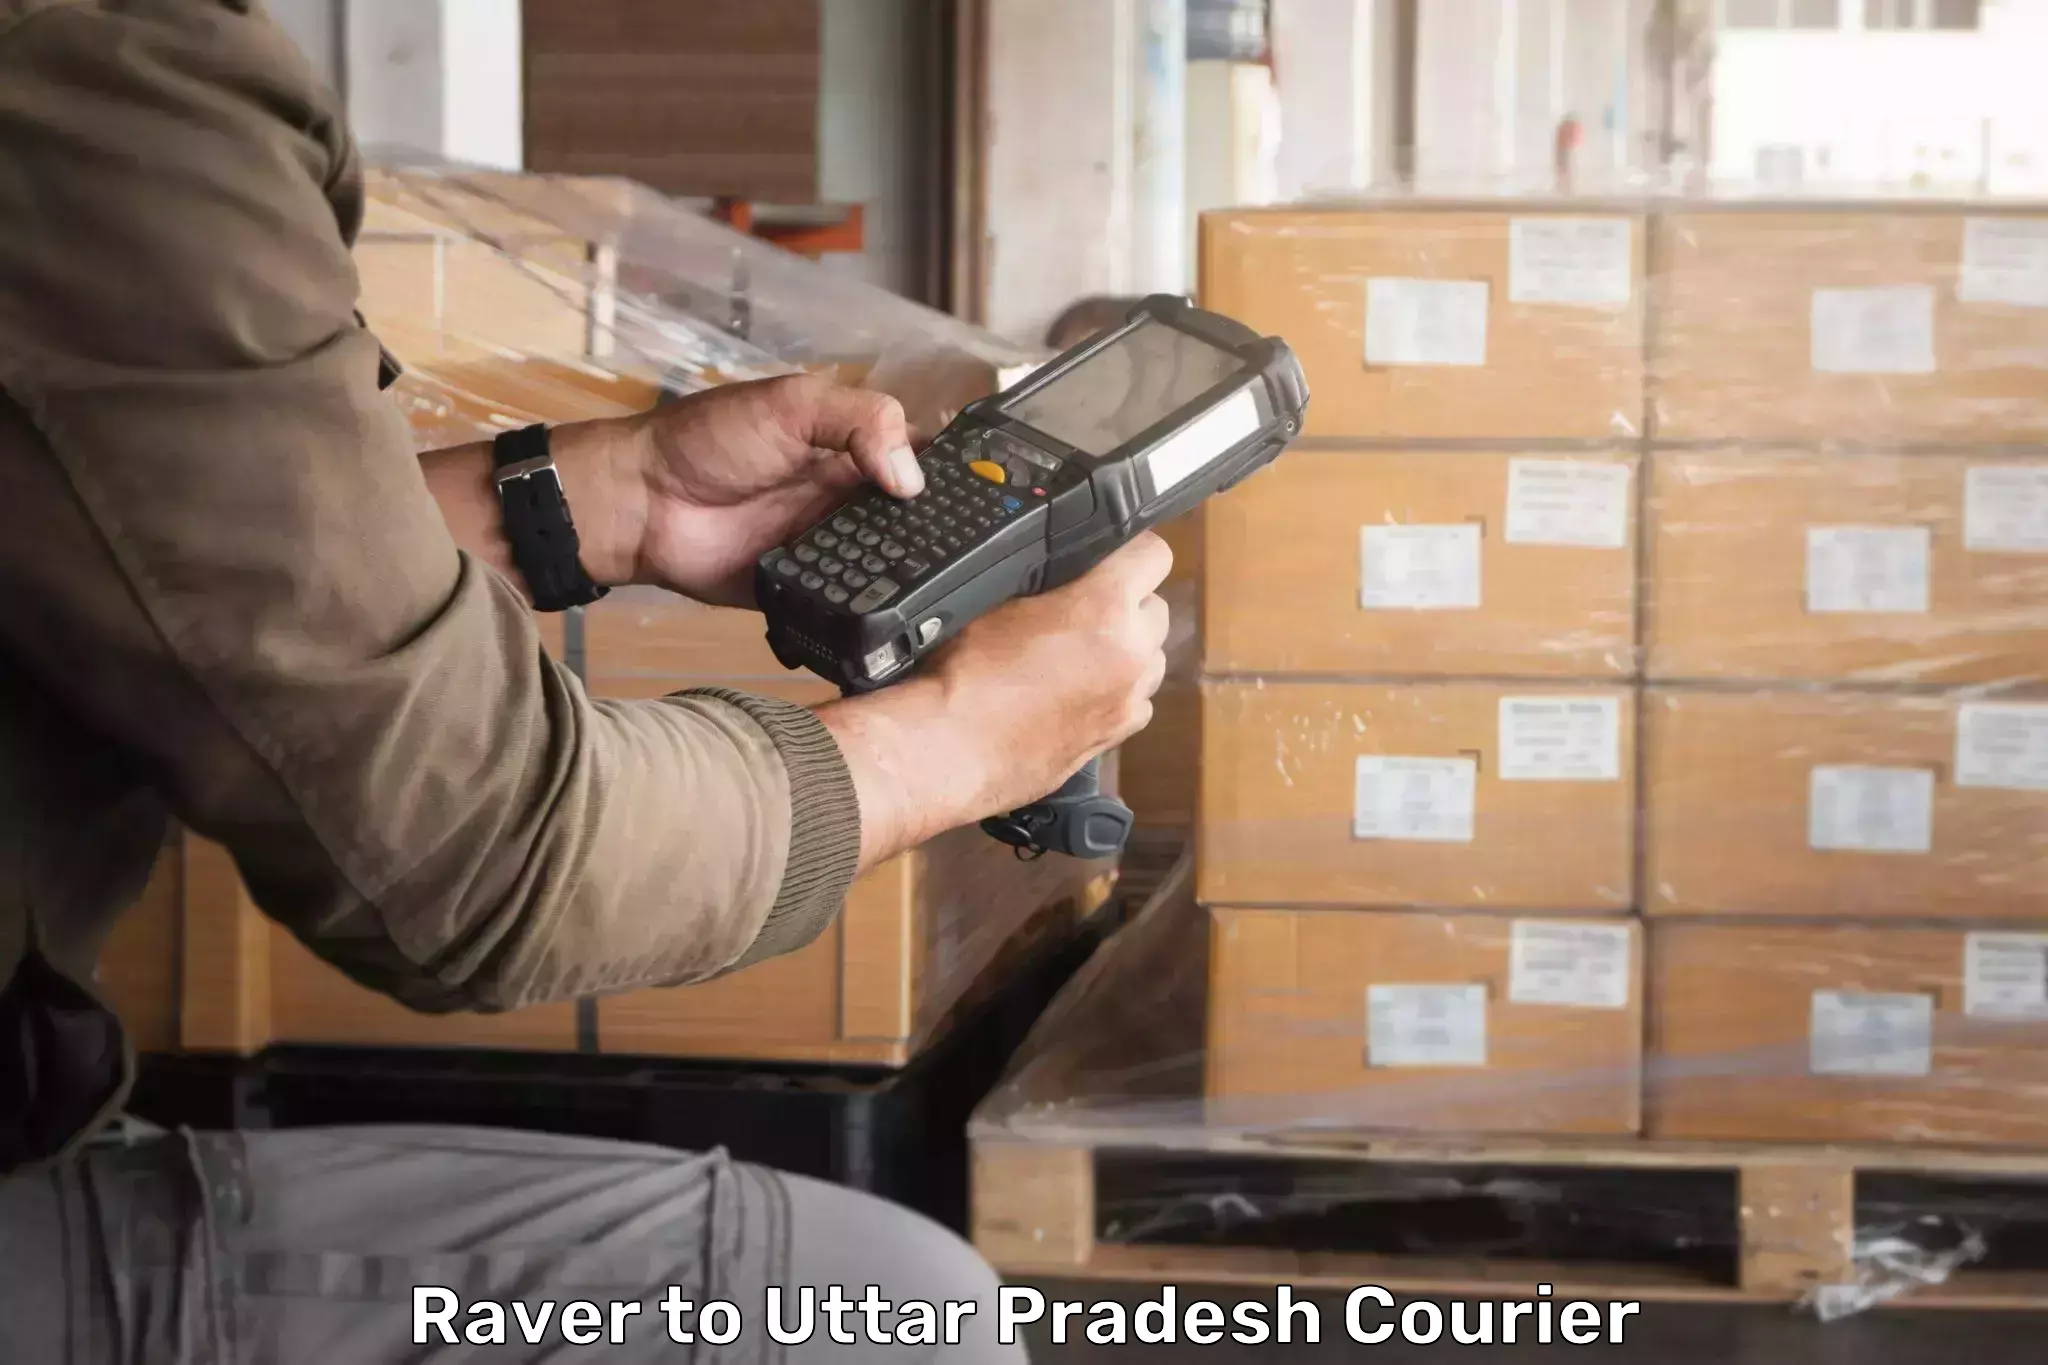 State-of-the-art courier technology in Raver to Saidabad